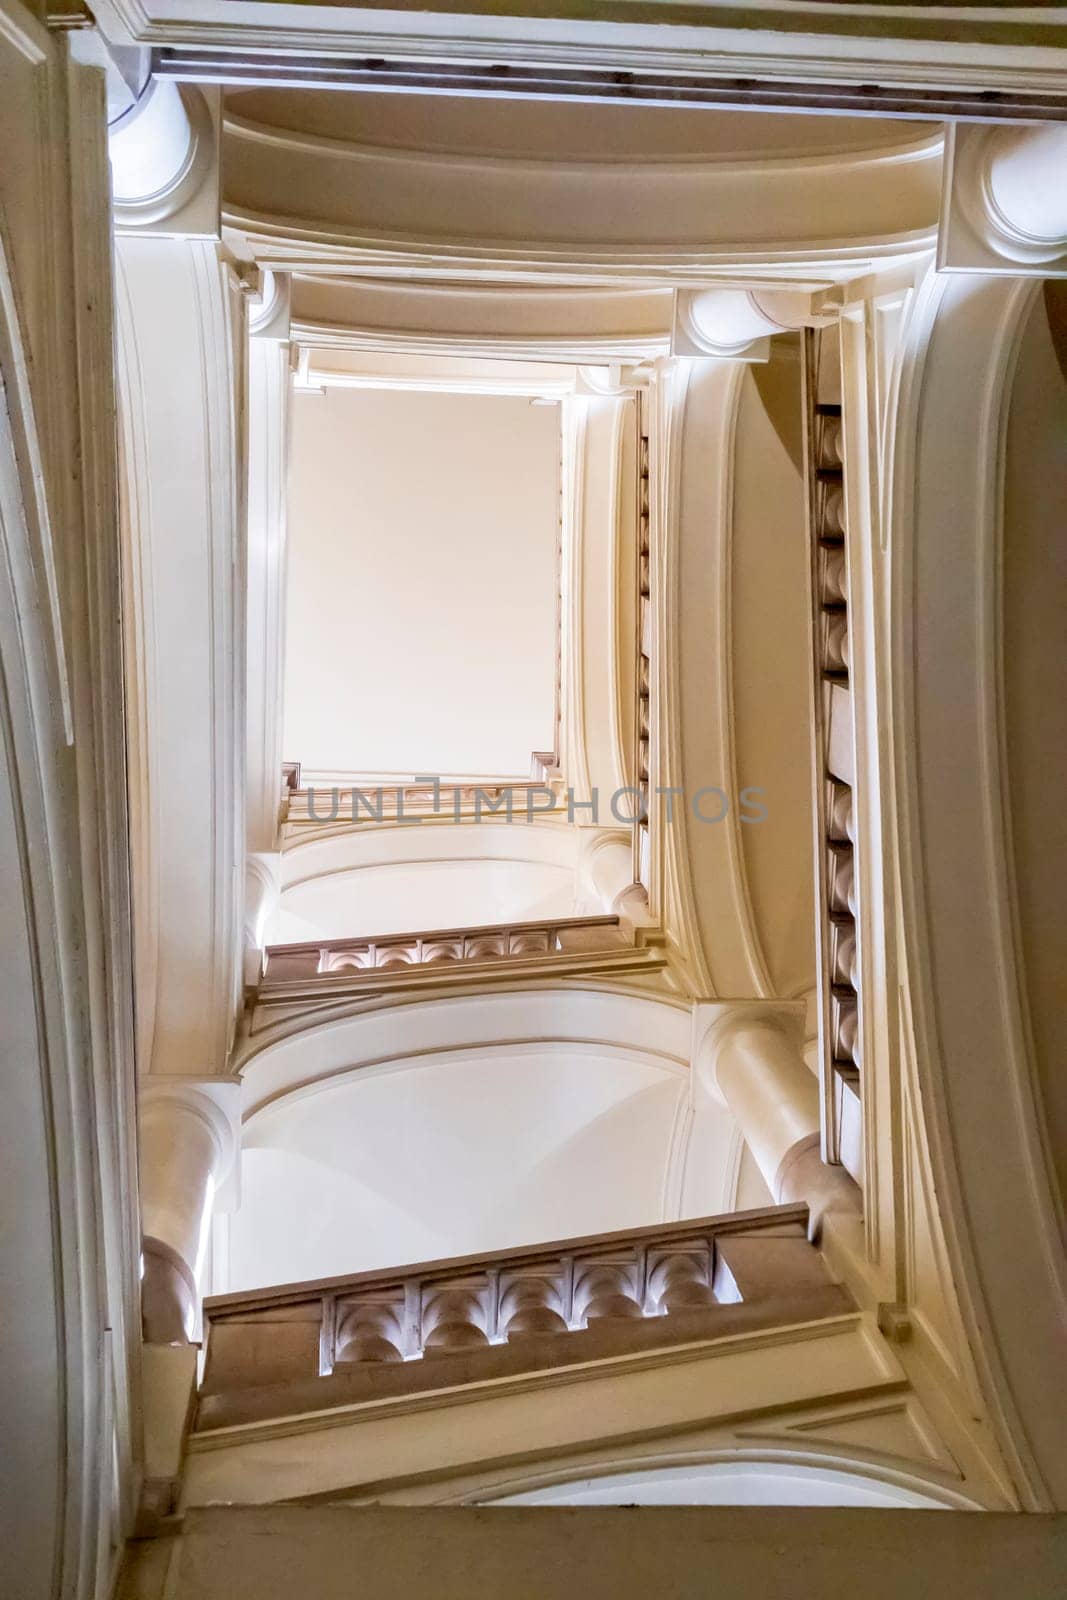 View of the staircase in the tower. Vertical view